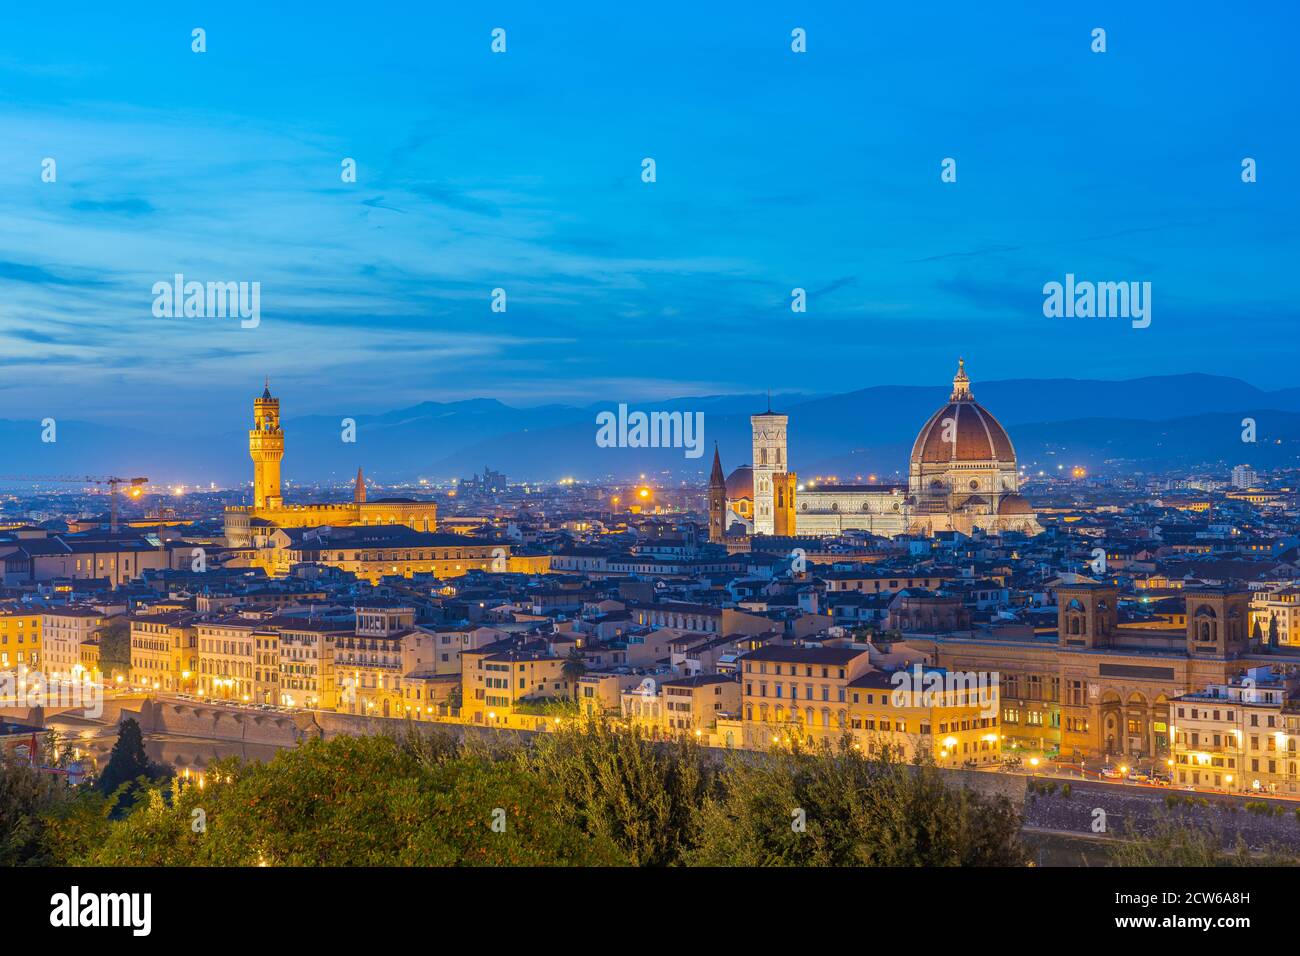 View of Florence skyline at night with view of Duomo of Florence in Tuscany, Italy. Stock Photo